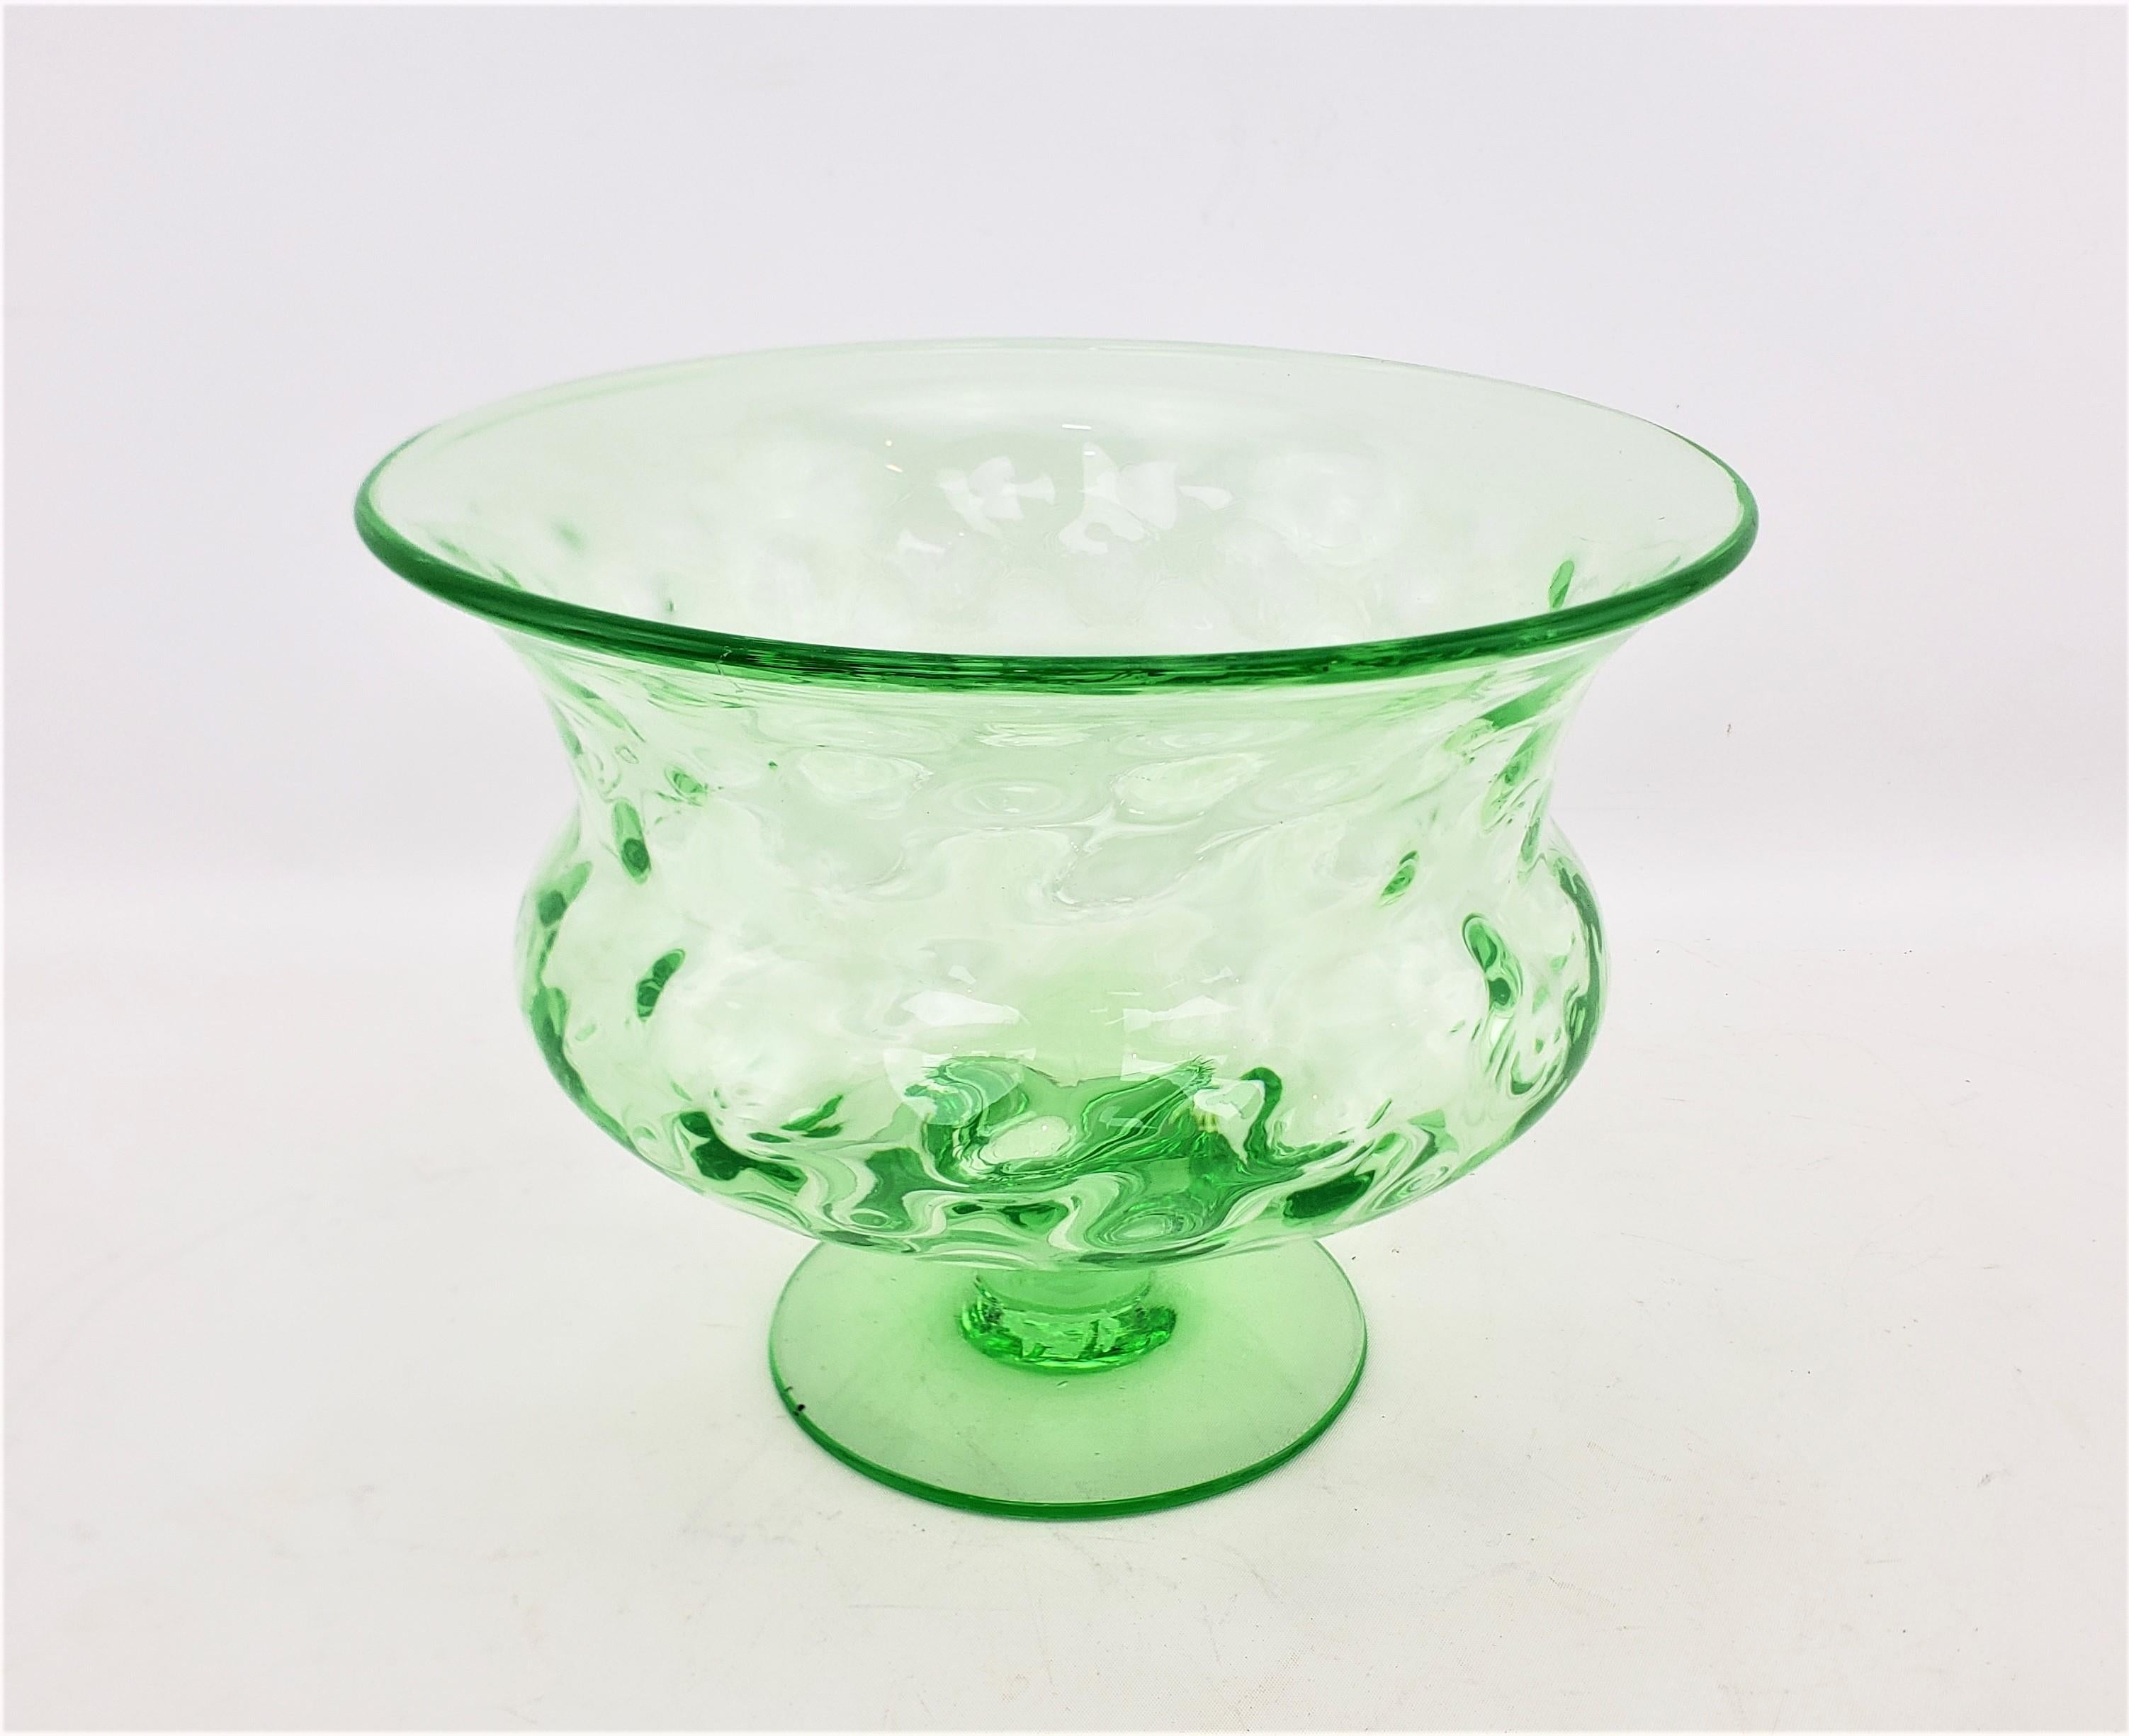 This antique pedestal bowl is unsigned, but presumed to have originated from the United States, and date to approximately 1920 and done in a Victorian style. The bowl is done with uranium green glass and has a flared rim, with raised bulbous